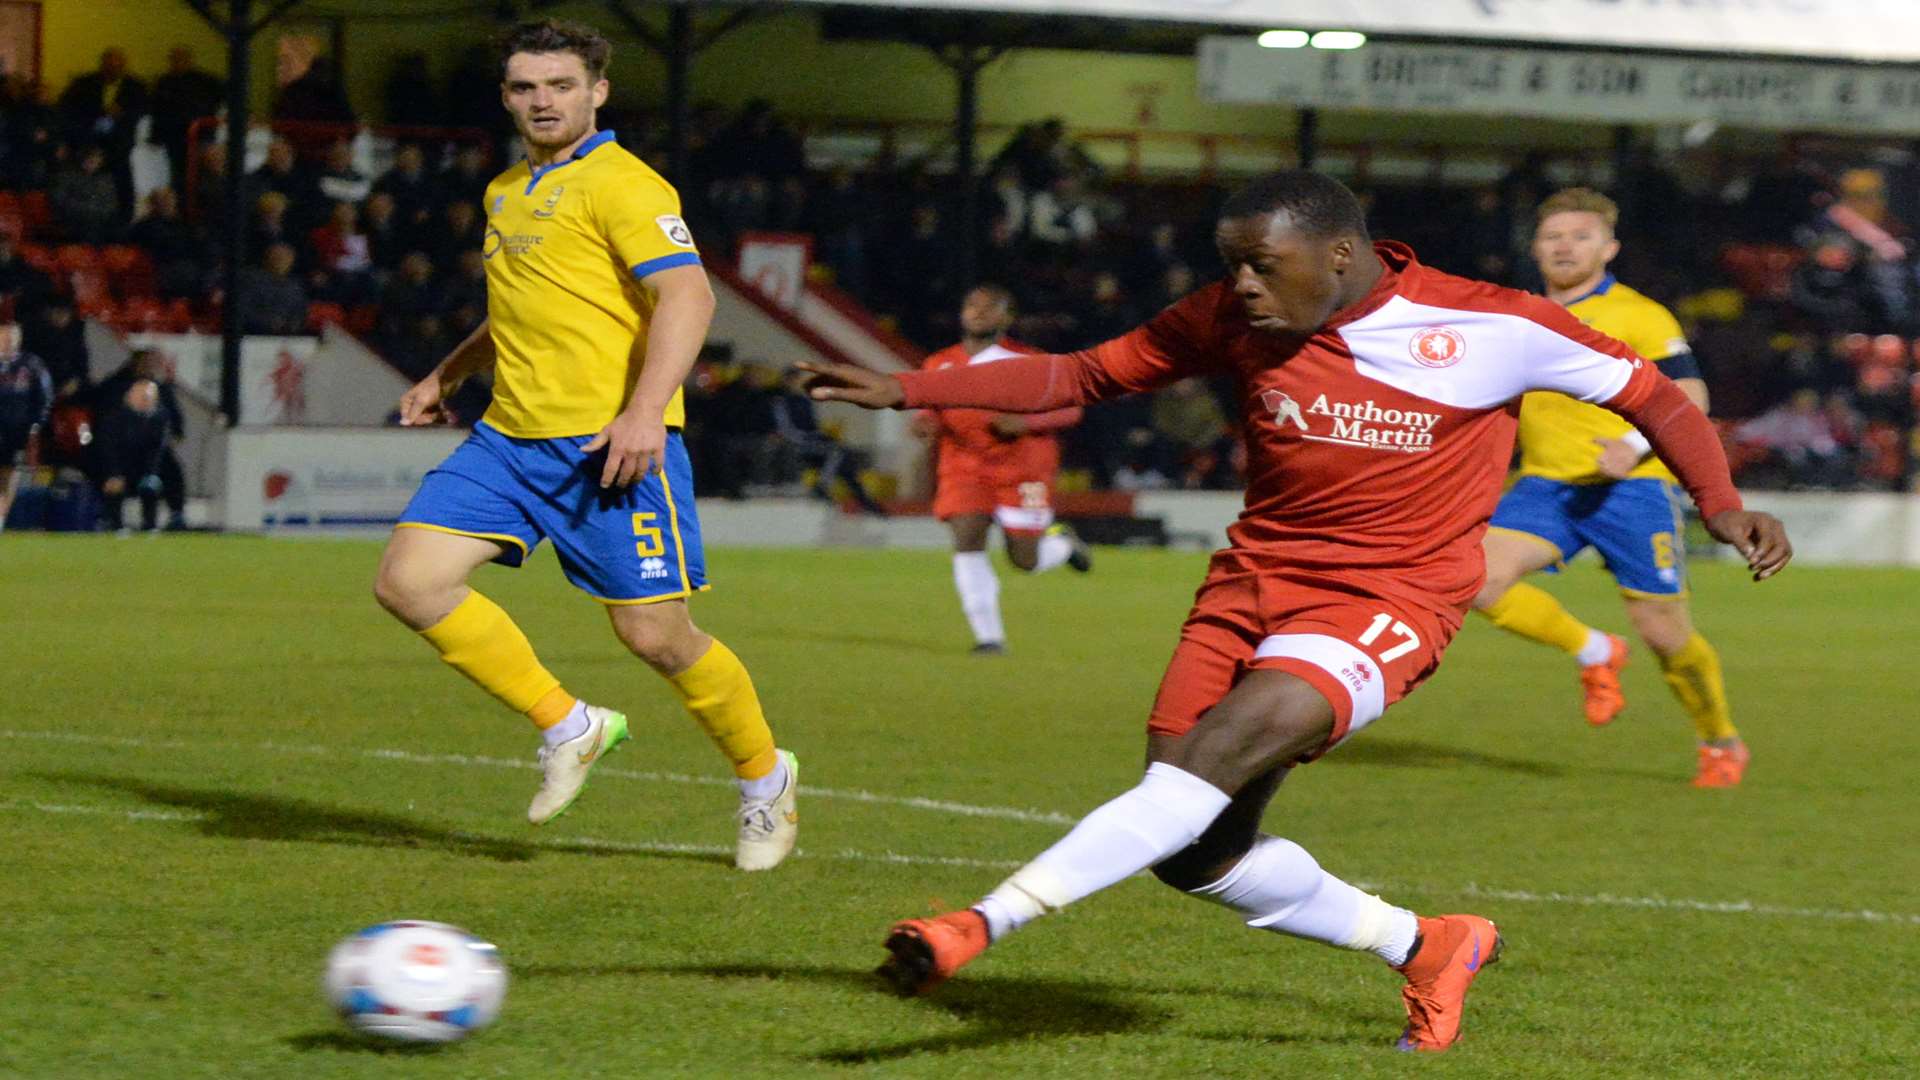 Welling's Afolabi Obafemi scores the winner against Lincoln. Picture: Keith Gillard